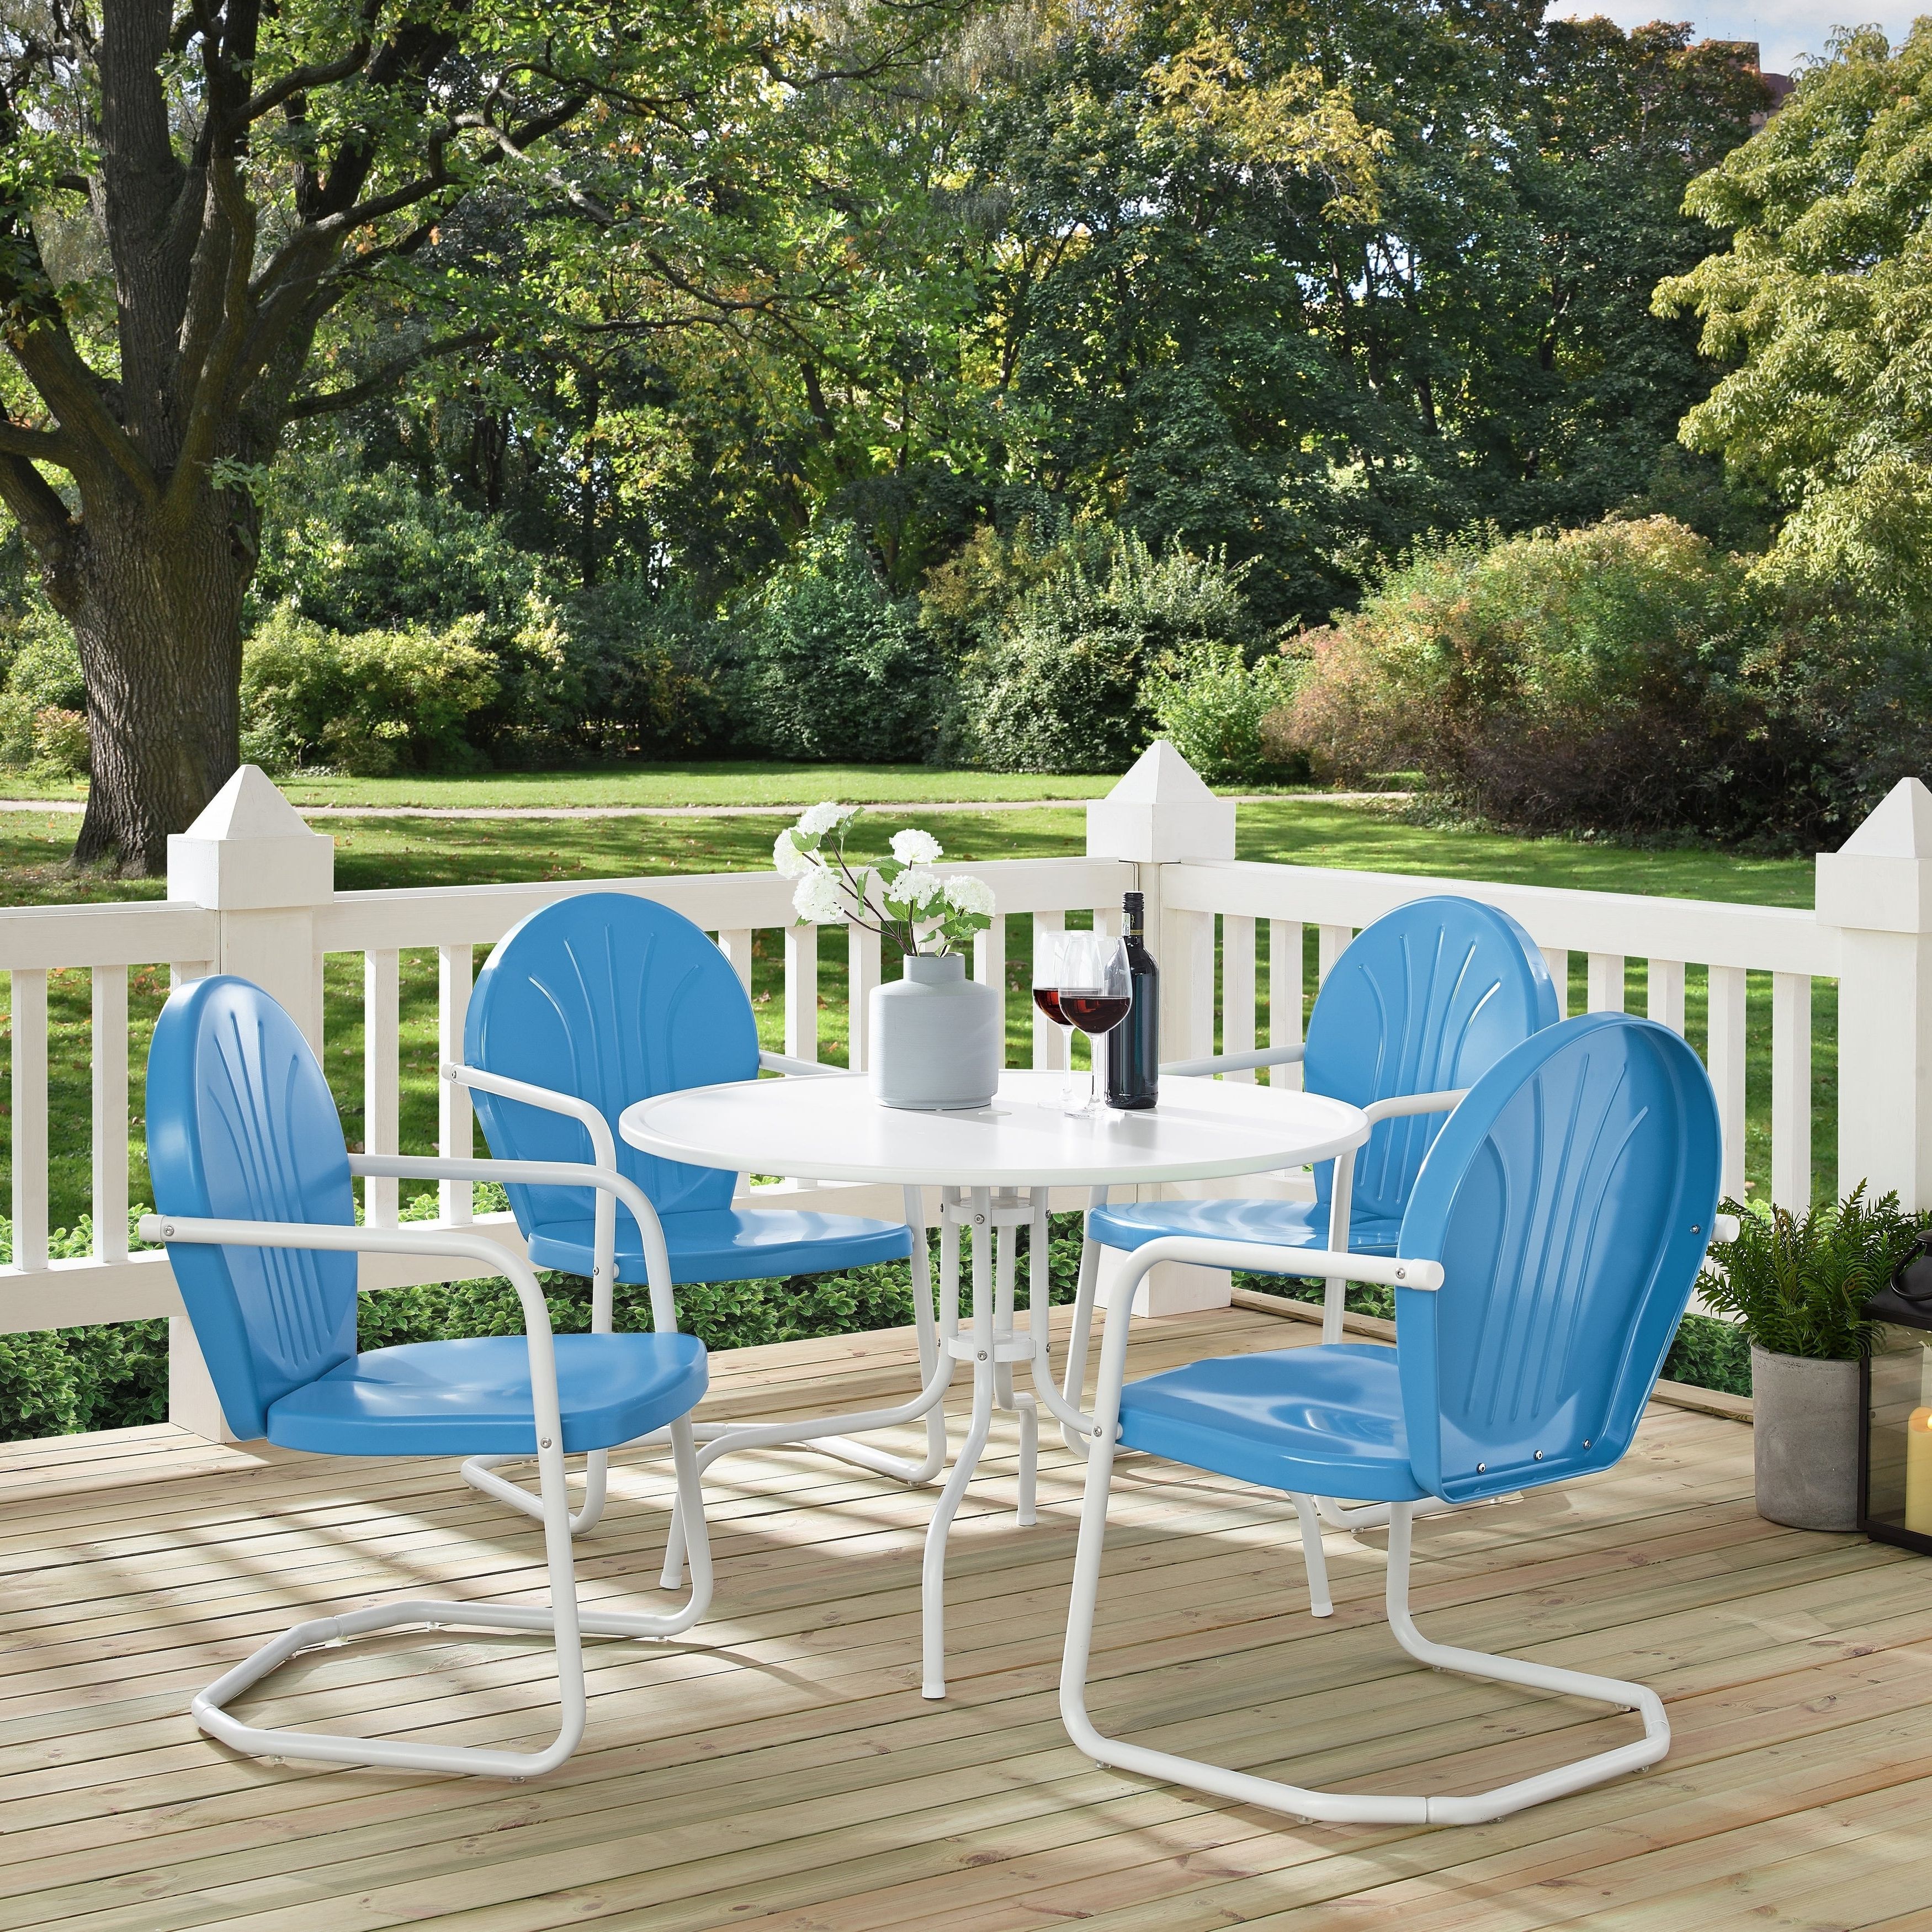 Bate Red Retro 3 Piece Dining Sets In Most Recently Released Vintage Patio Furniture (View 16 of 20)